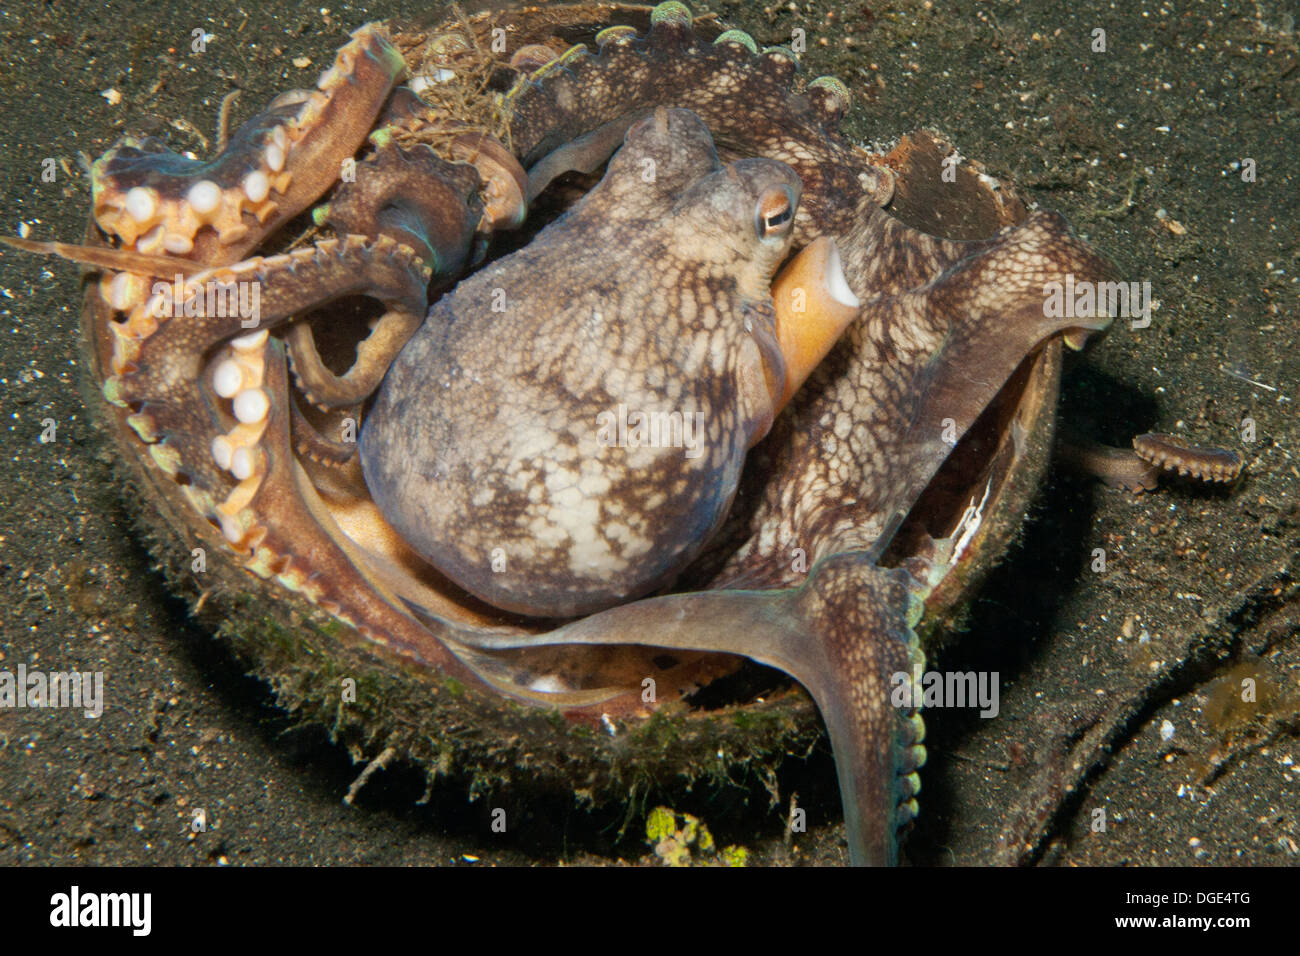 Octopus hides in coconut shell Stock Photo